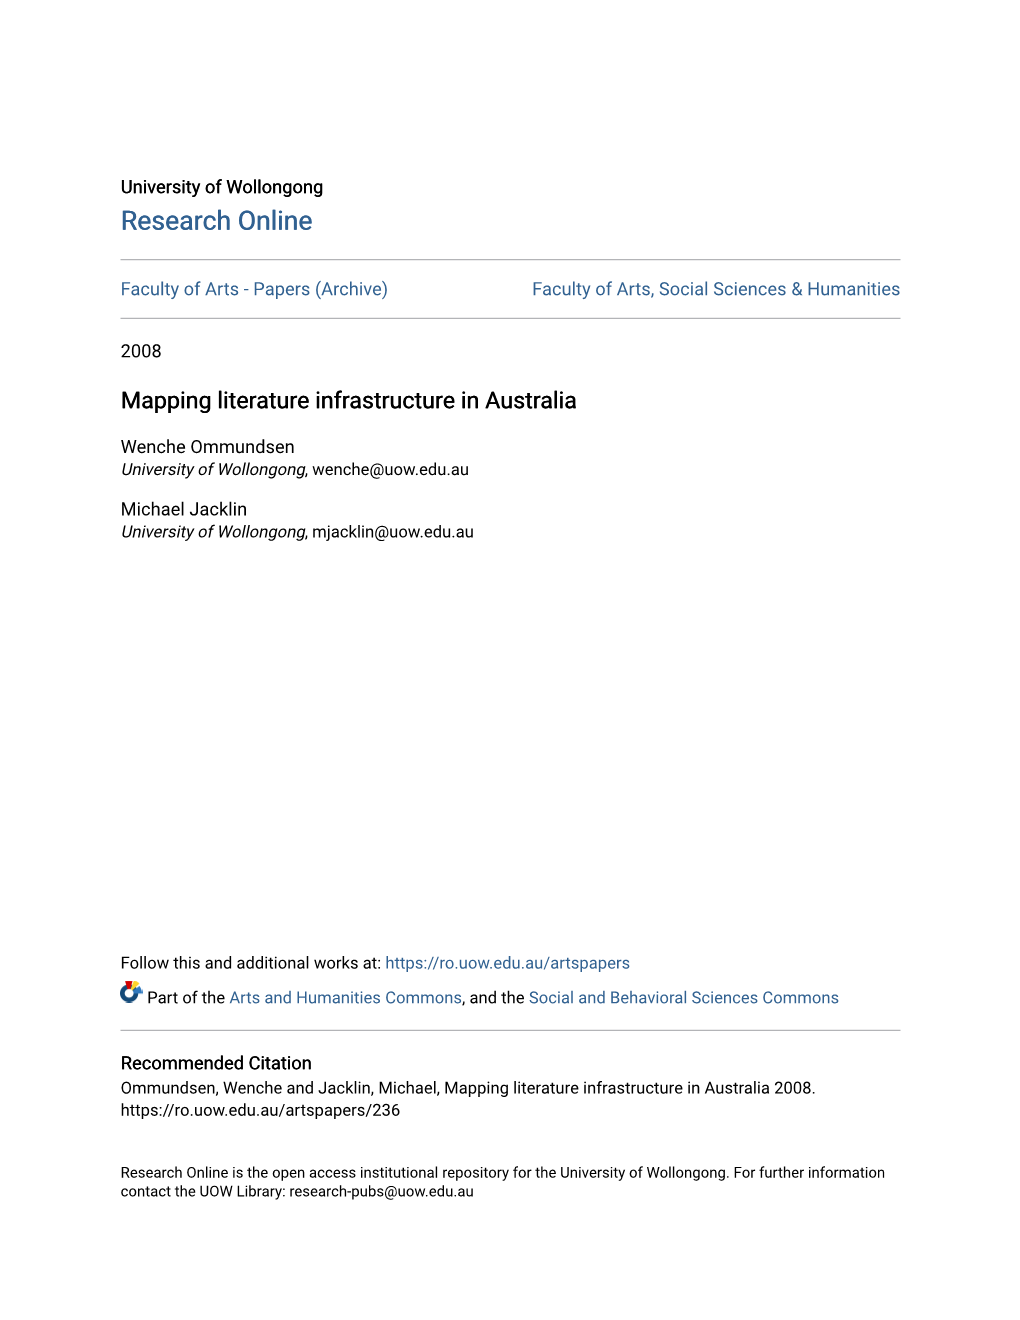 Mapping Literature Infrastructure in Australia